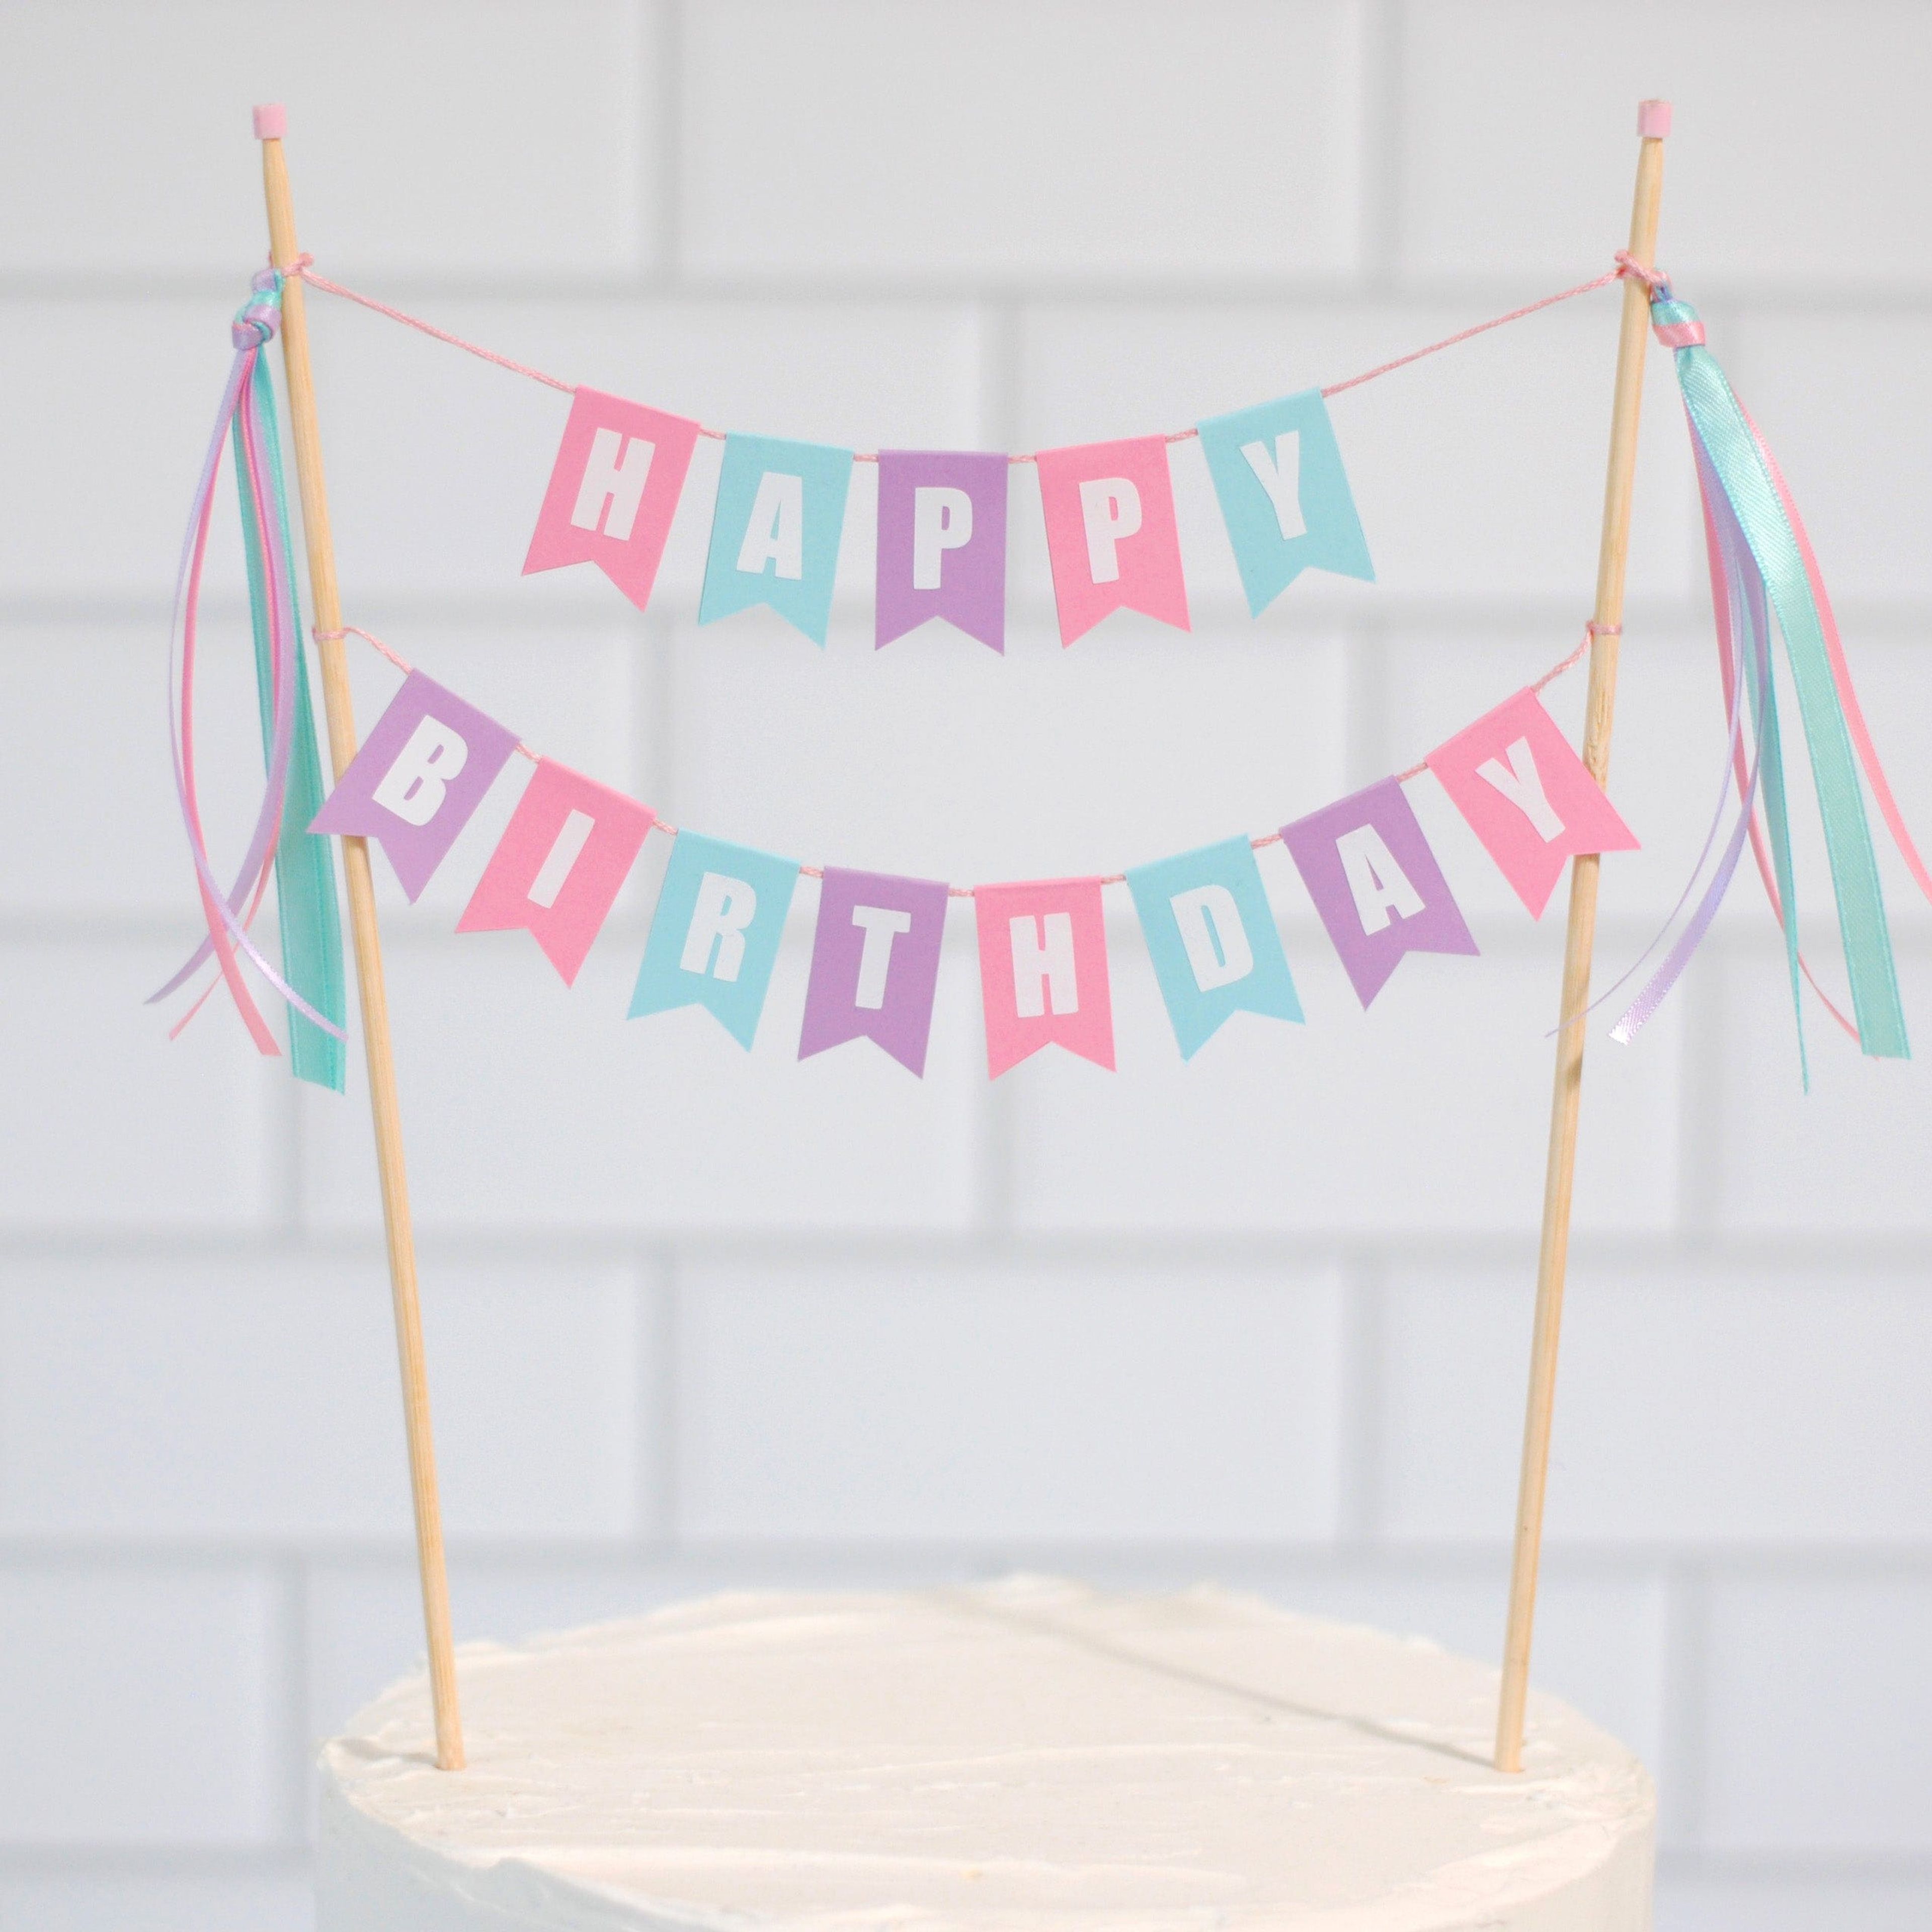 HAPPY BIRTHDAY Cake Topper (Cotton Candy Colors)